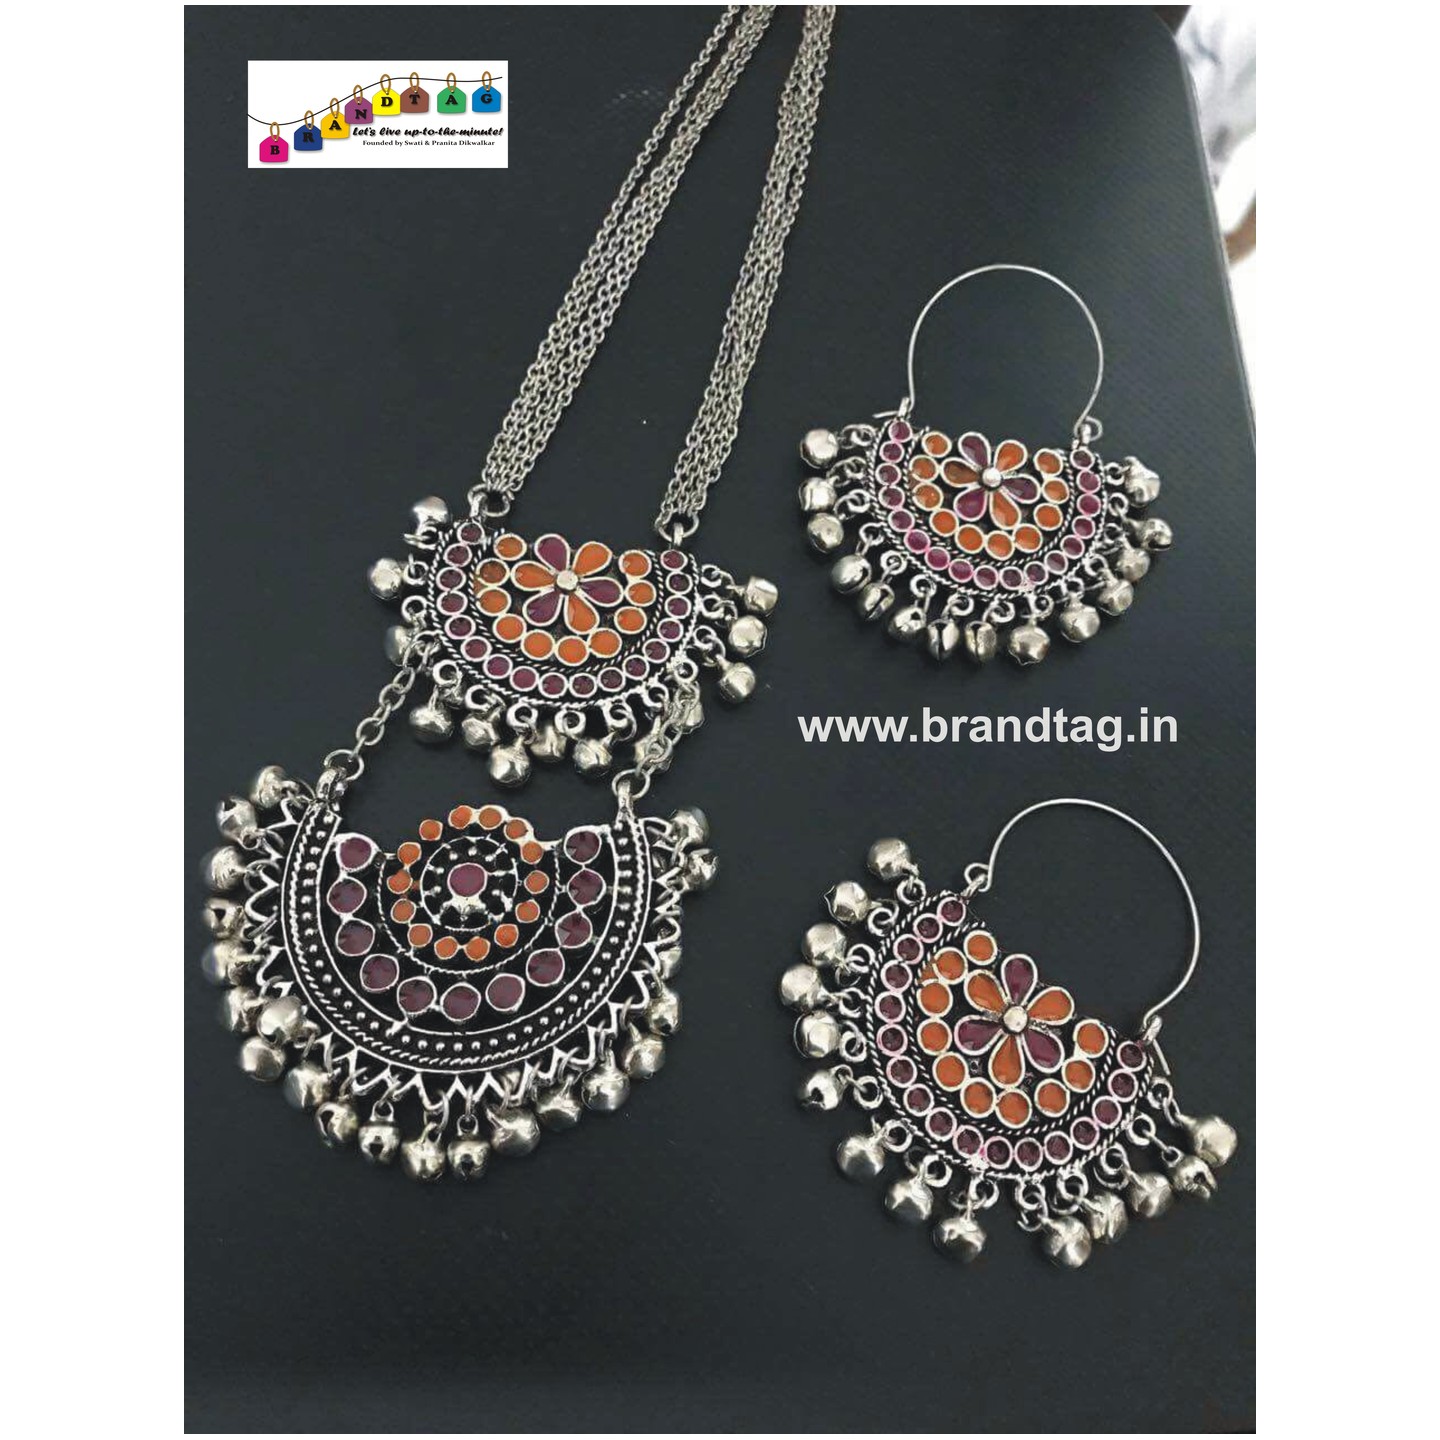 Special Navratri Collection...Silver Oxidized Afgaani Necklace Set!! 